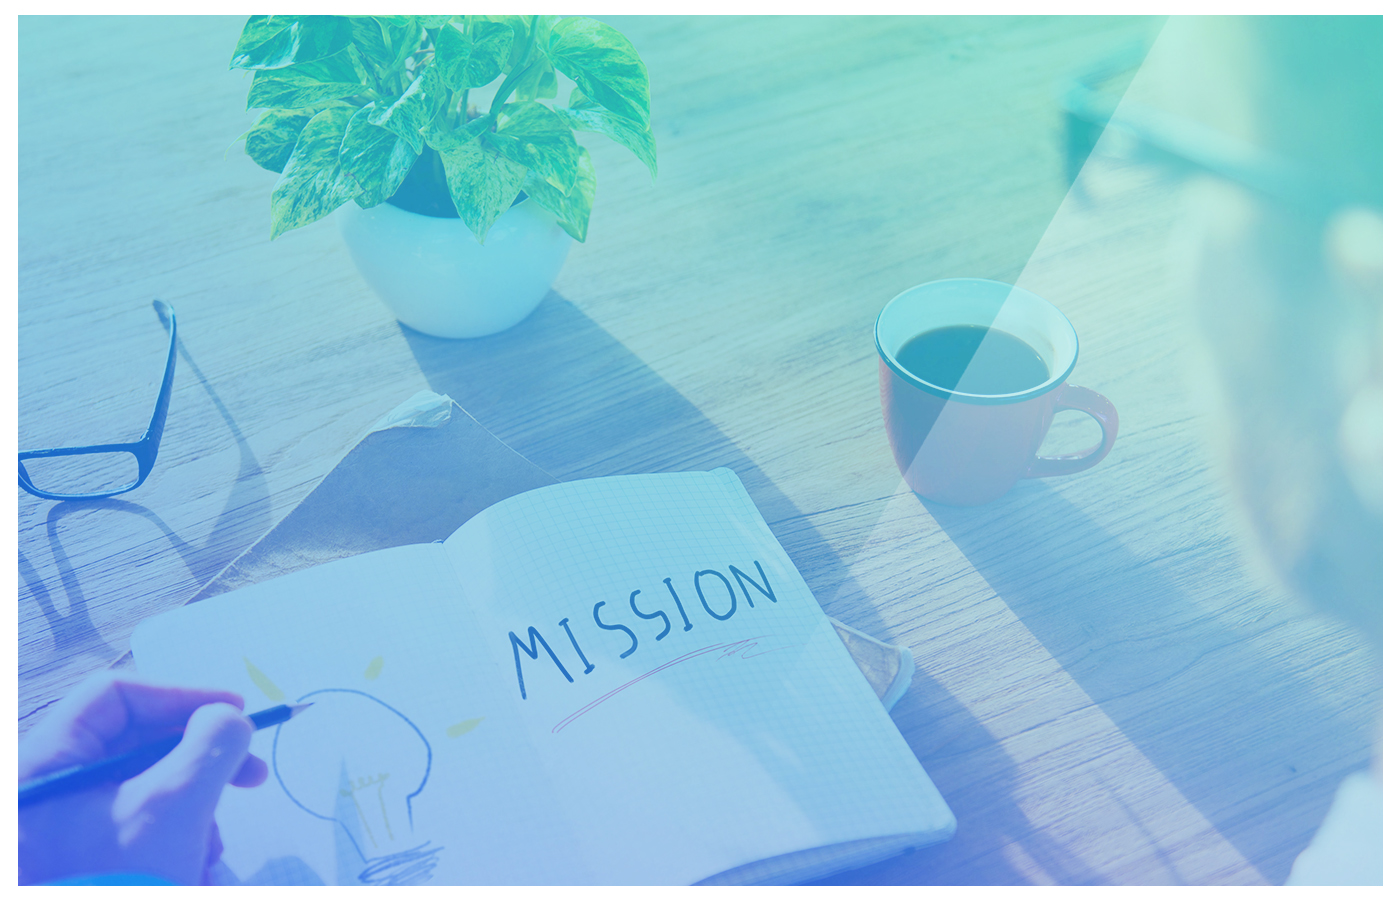 4 Things to consider when writing a mission statement